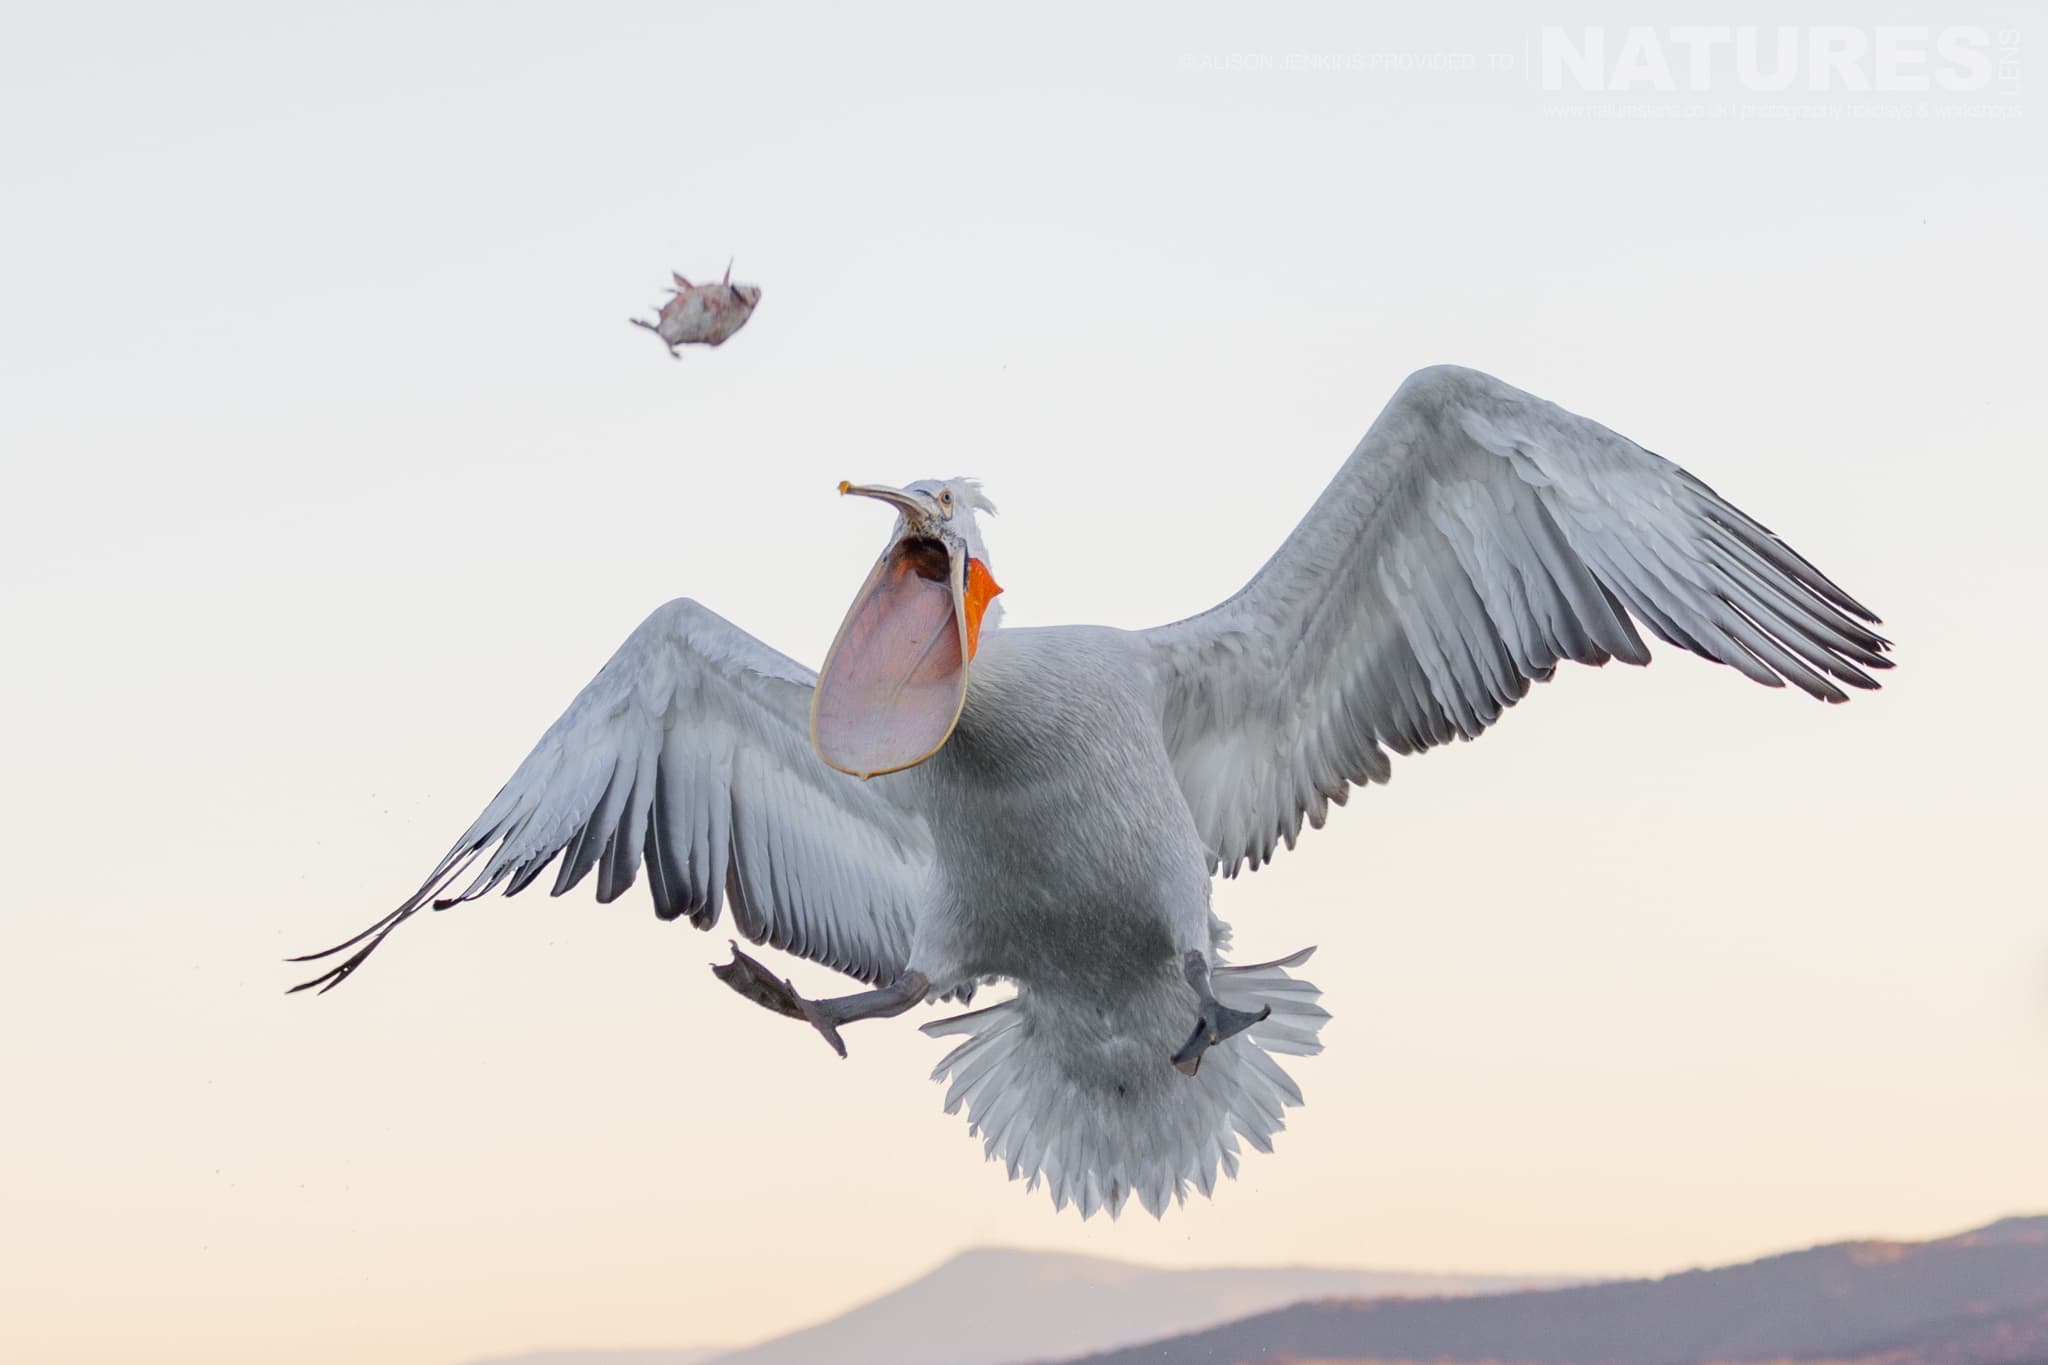 One Of The Pelicans Of Lake Kerkini Lunges For A Tossed Fish In Mid Air Photographed During A Natureslens Wildlife Photography Holiday